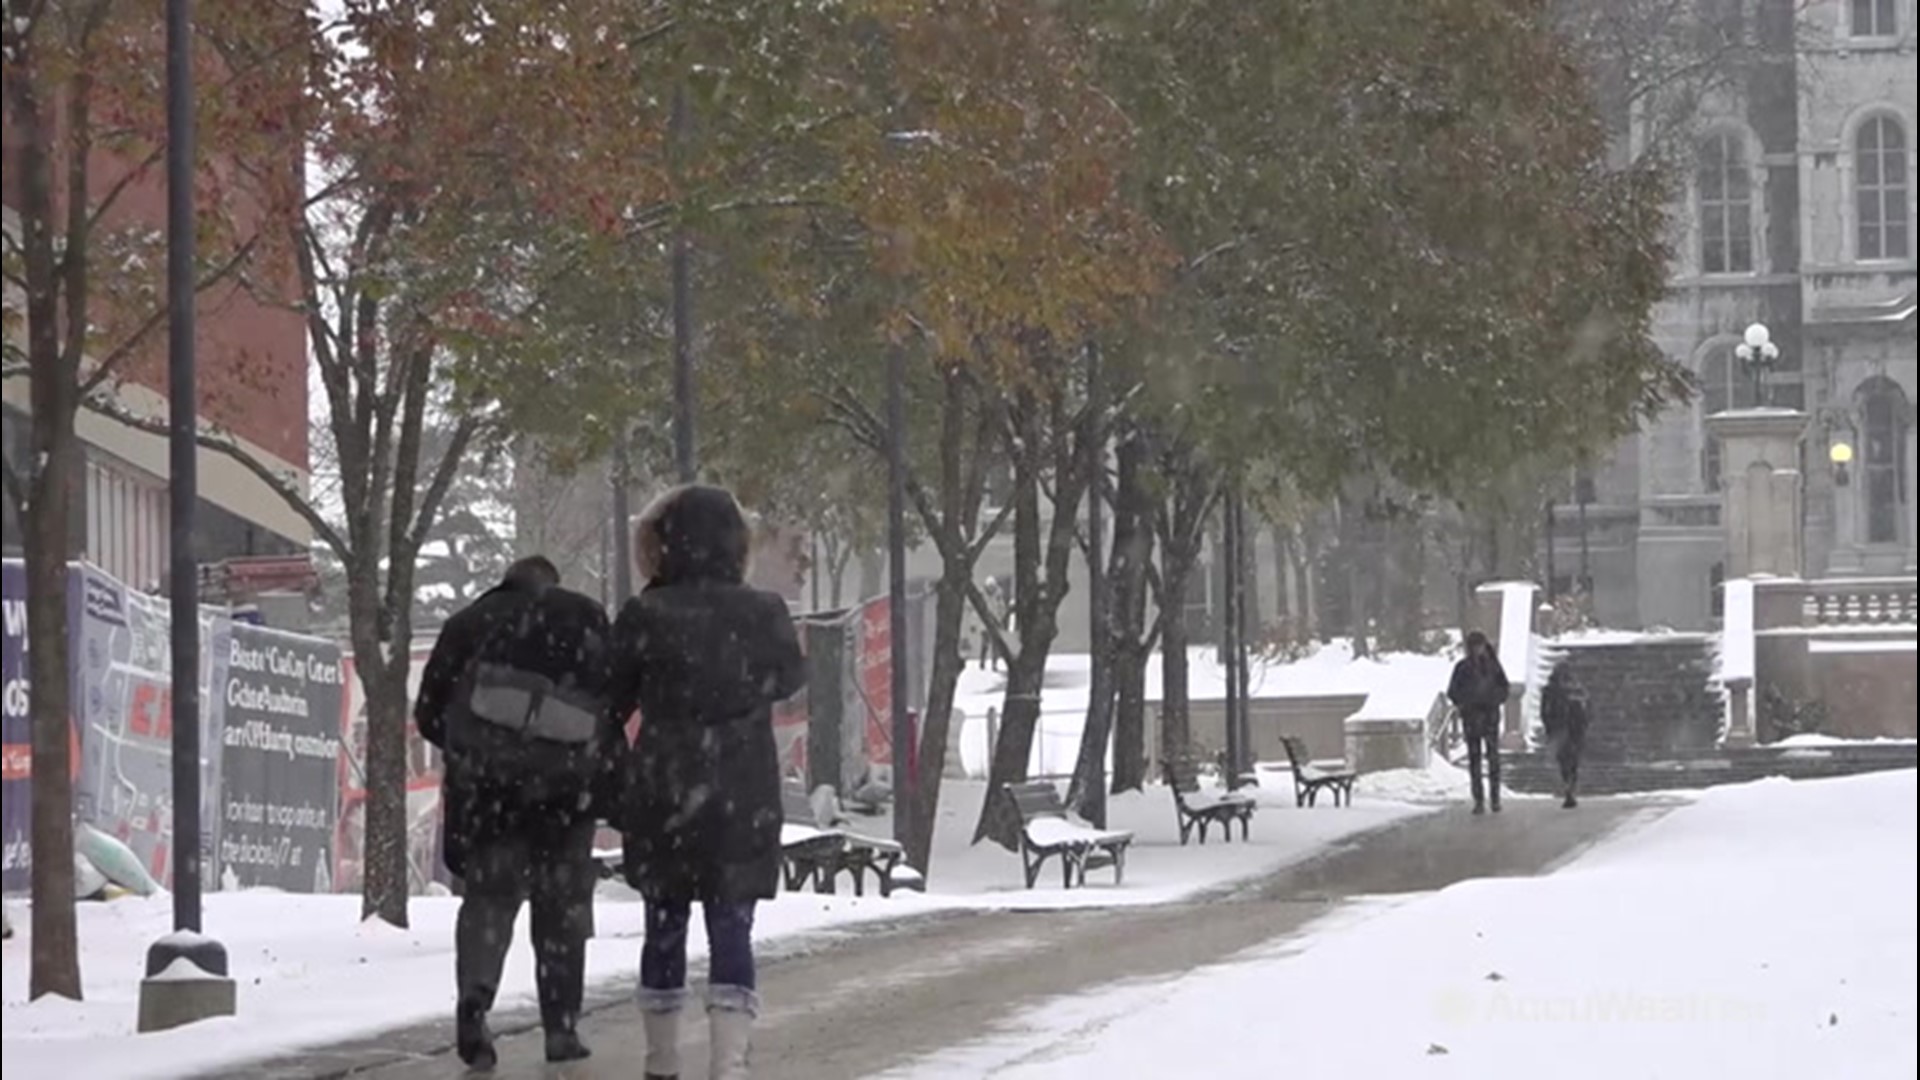 Syracuse University student Micah Pruyn Goldstein is happy about the recent snowfall in the Syracuse, New York, area because of what that means for him.